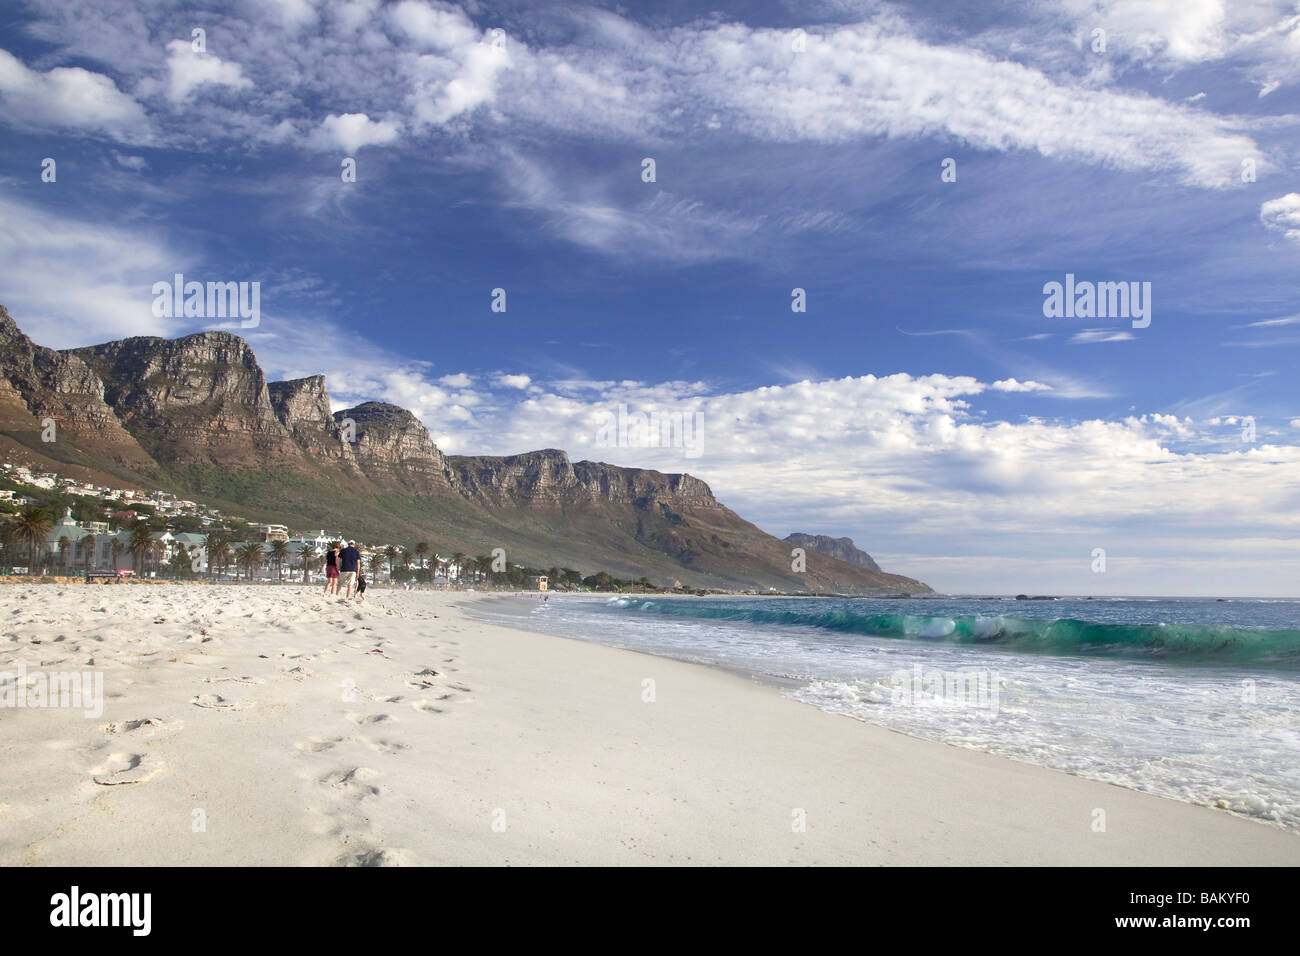 Camps bay beach and Twelve Apostles mountains, Cape Town, South Africa Stock Photo